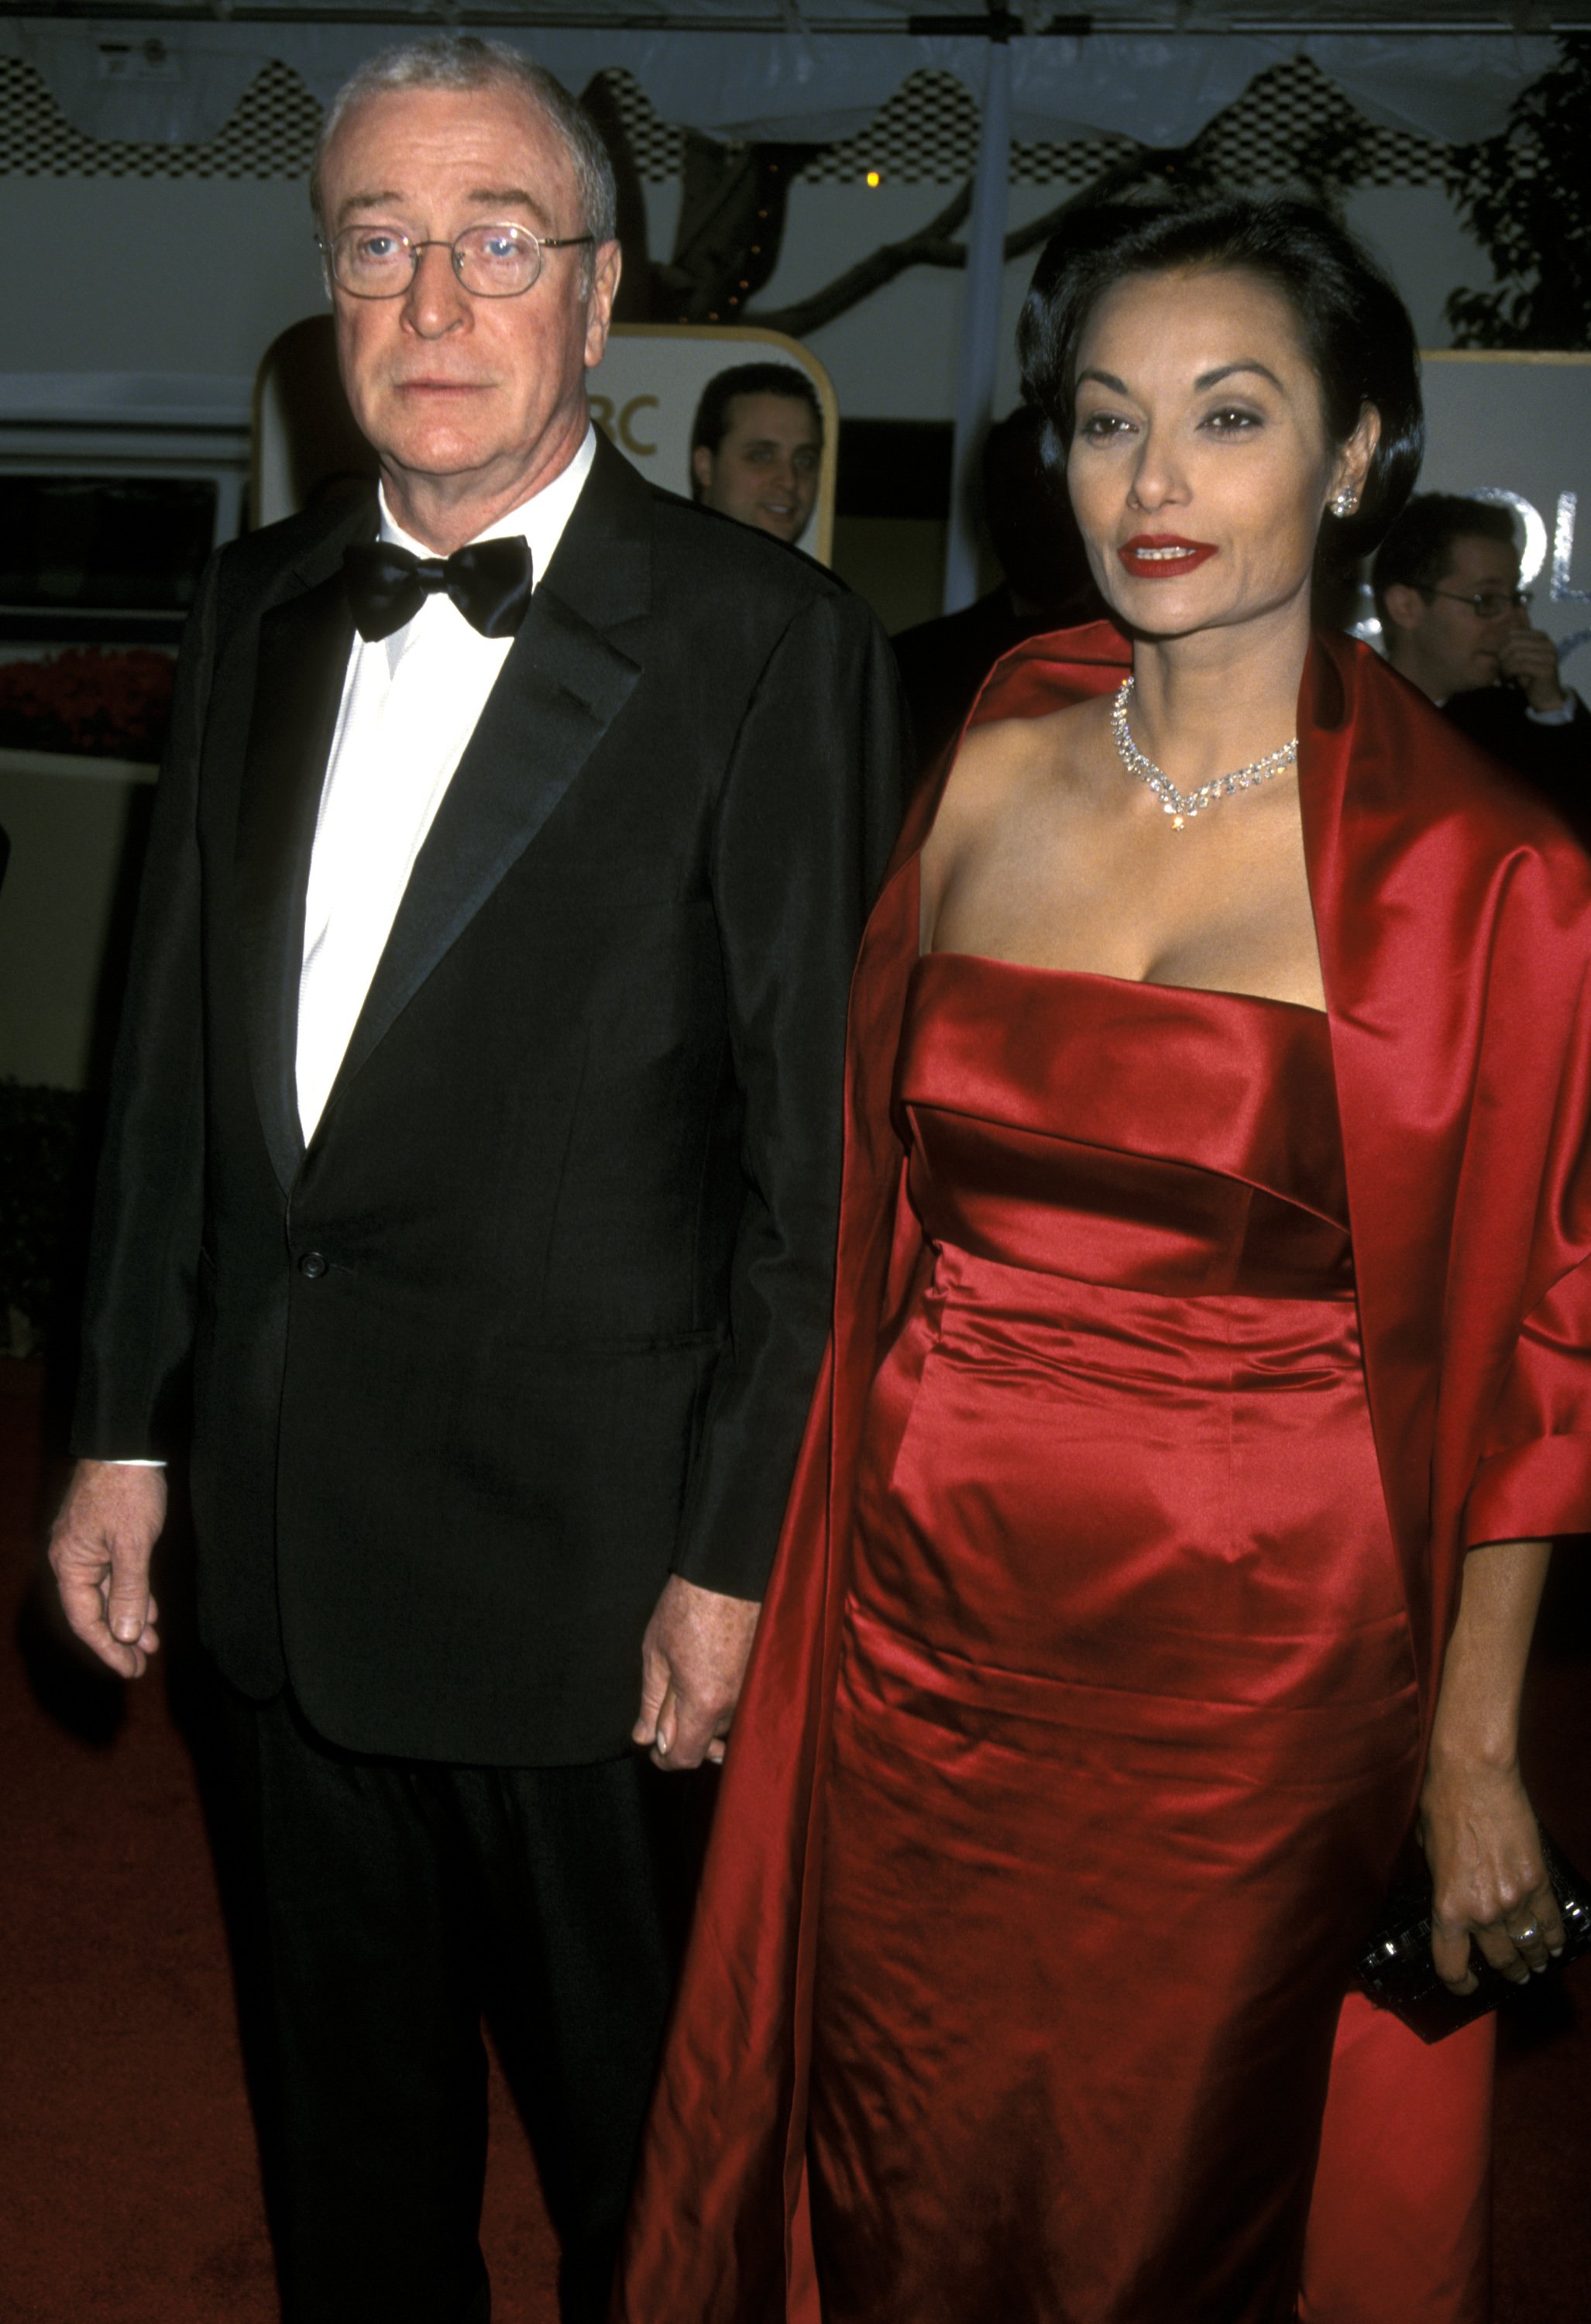 Michael Caine and Shakira Caine attend 56th Annual Golden Globe Awards on January 24, 1999 | Photo: Getty Images